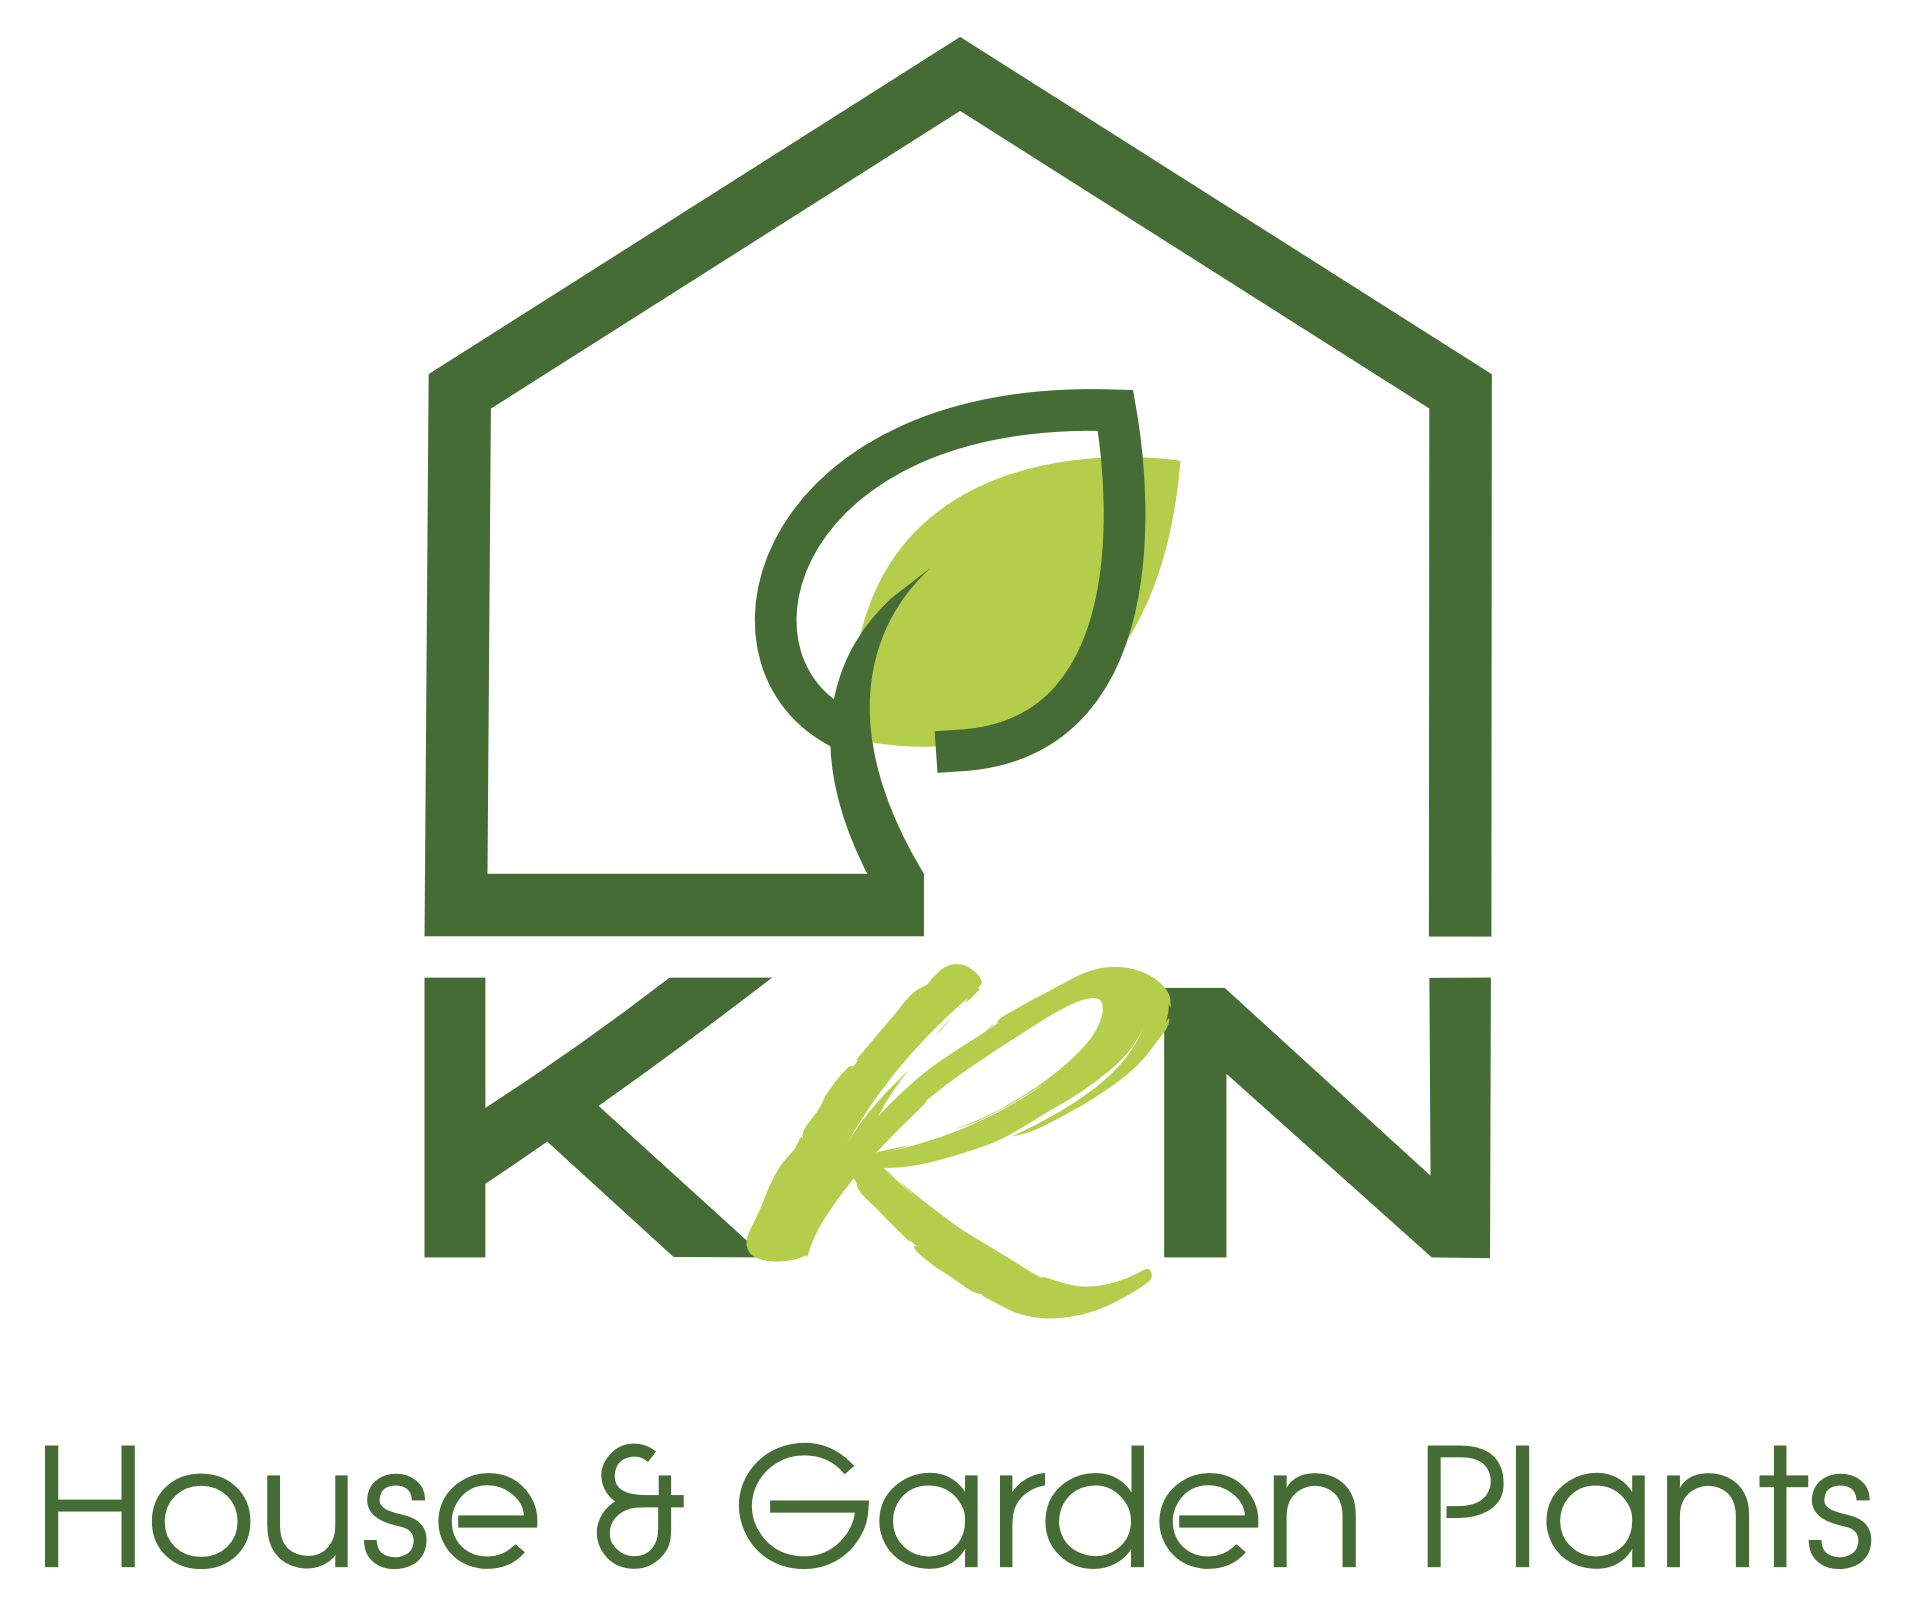 KRN House and Garden Plants